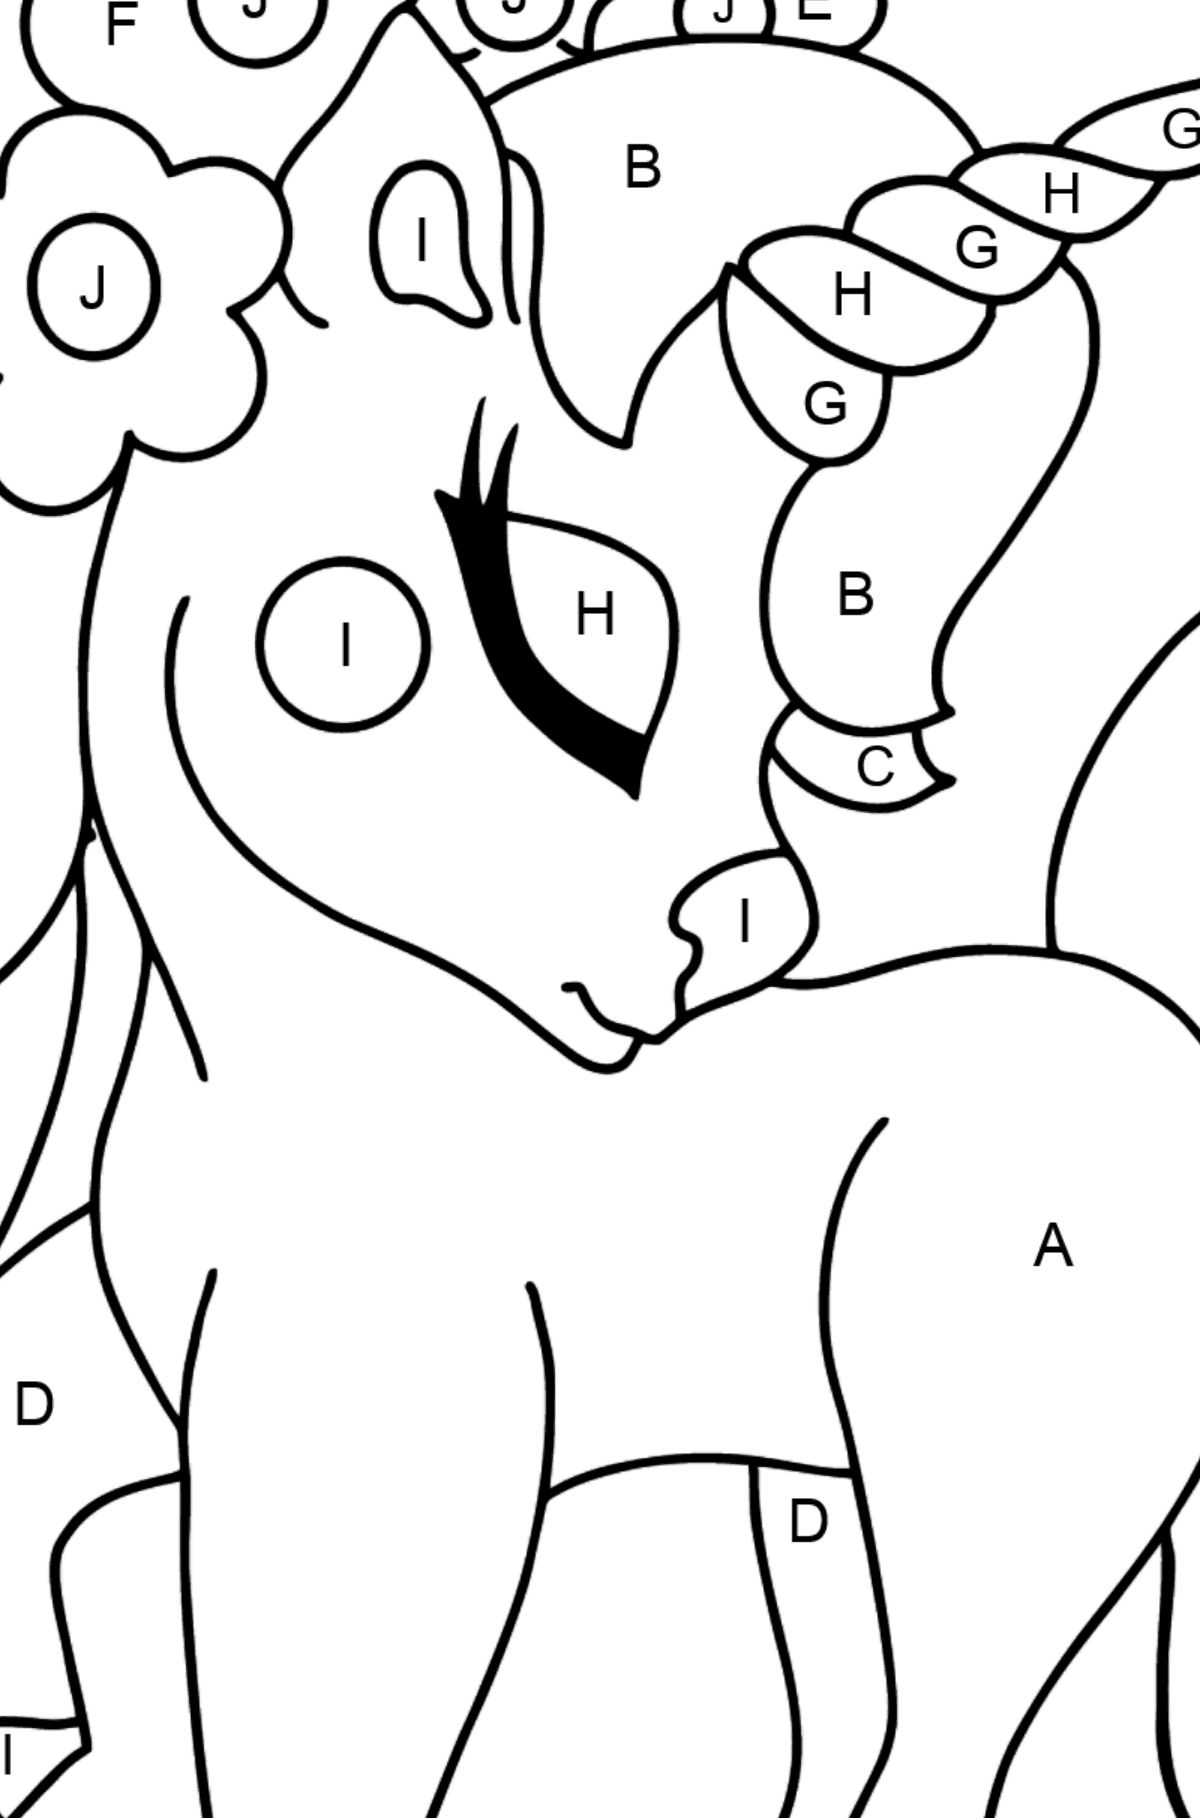 Unicorn in Dreams coloring page - Coloring by Letters for Kids